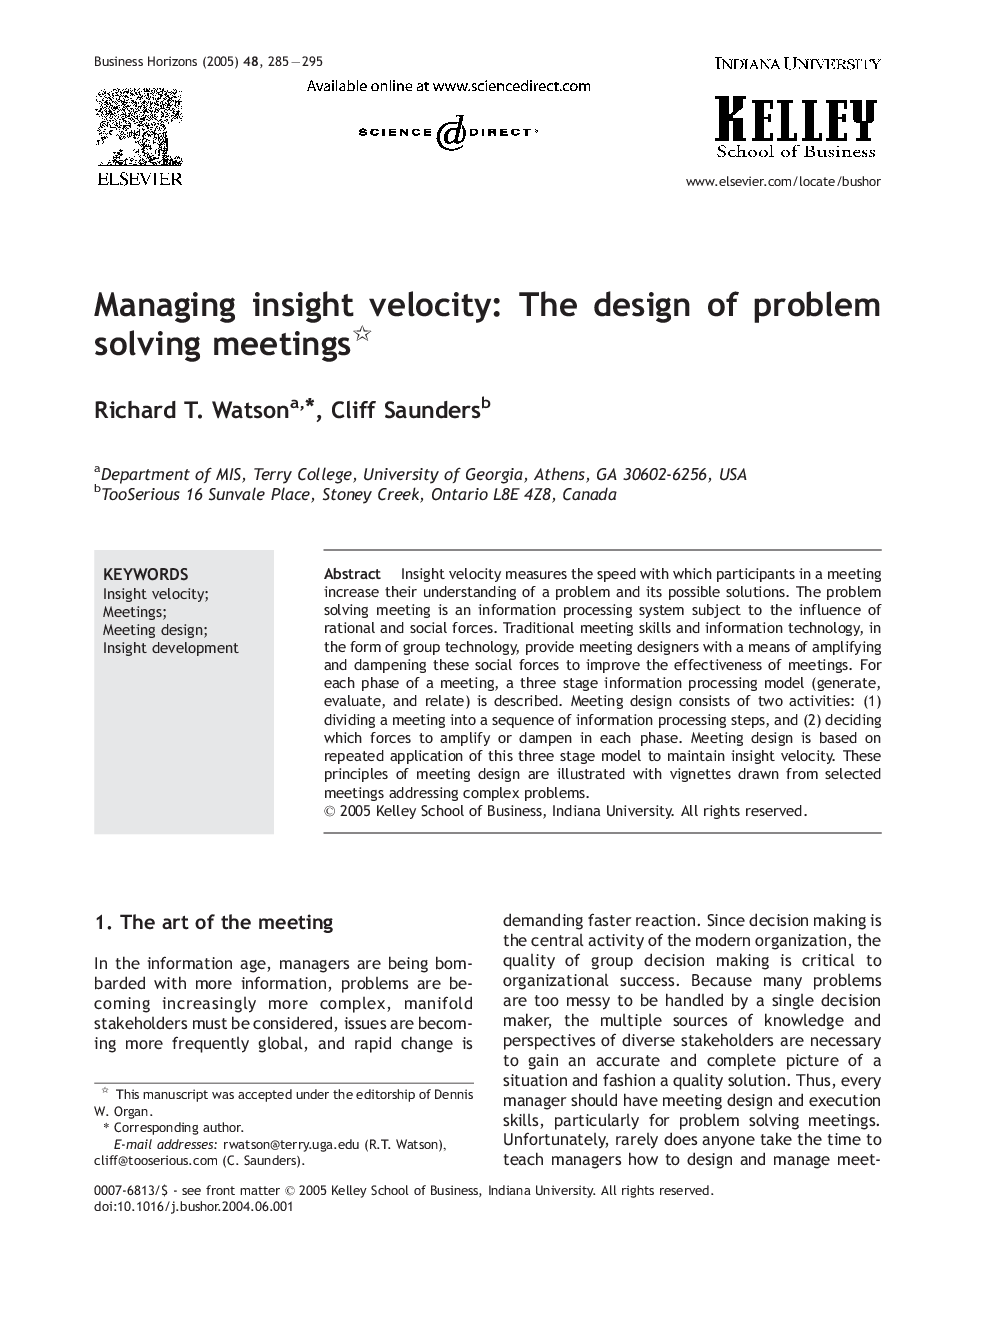 Managing insight velocity: The design of problem solving meetings